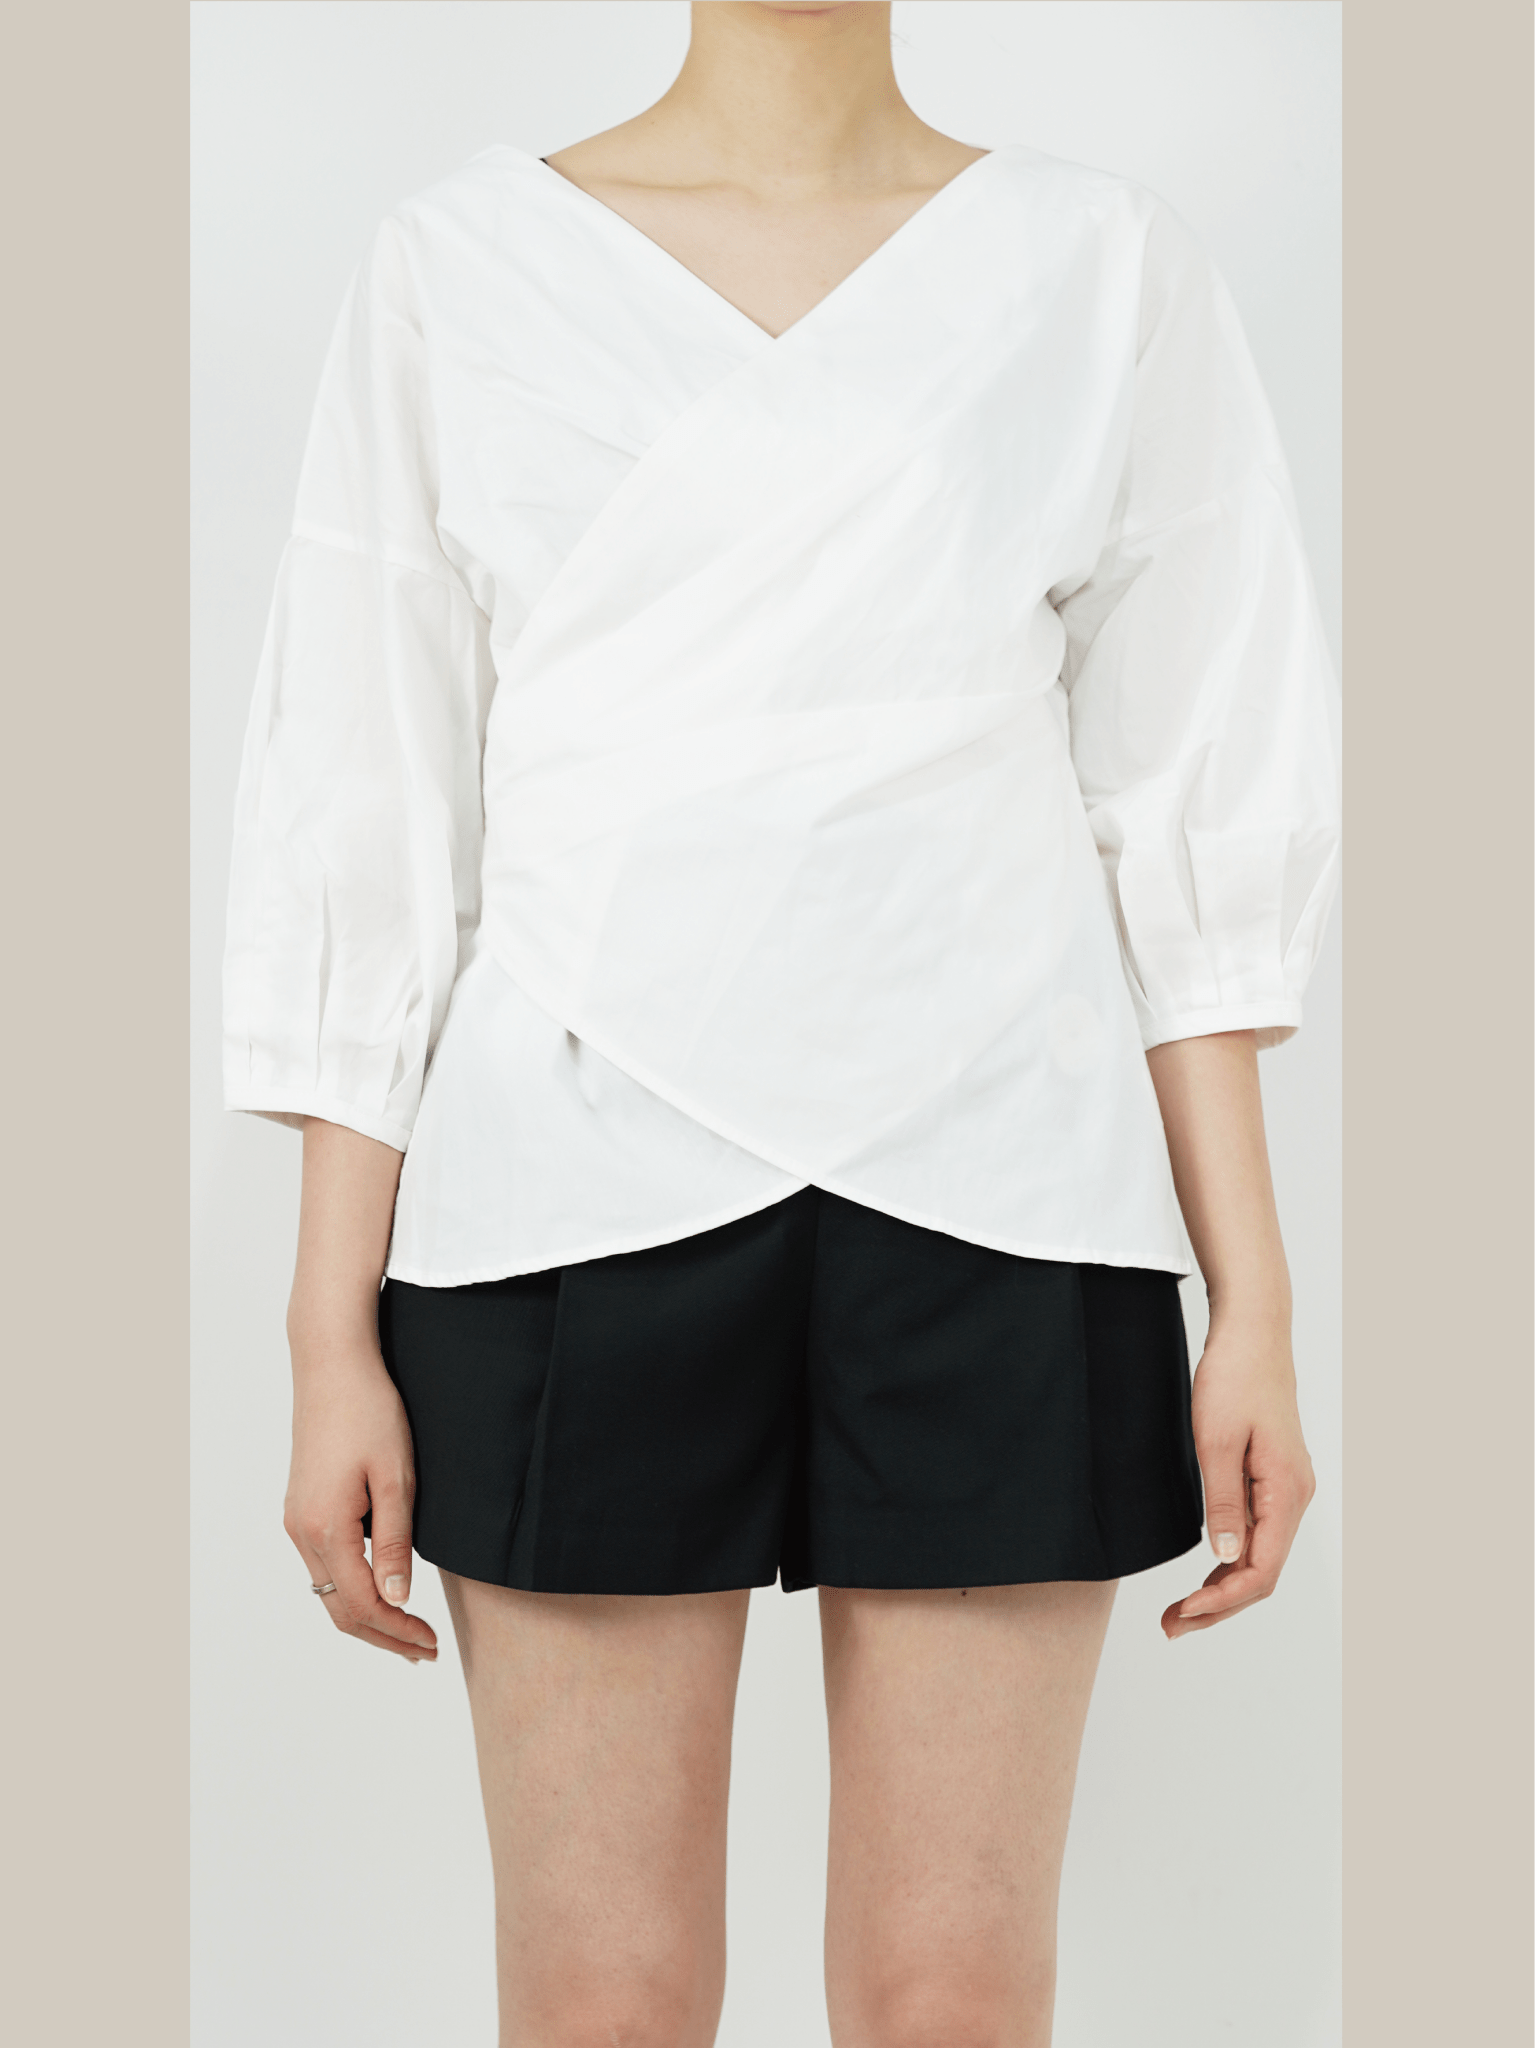 Five-point Puff Sleeve Shirt - LOVE POMME POMME